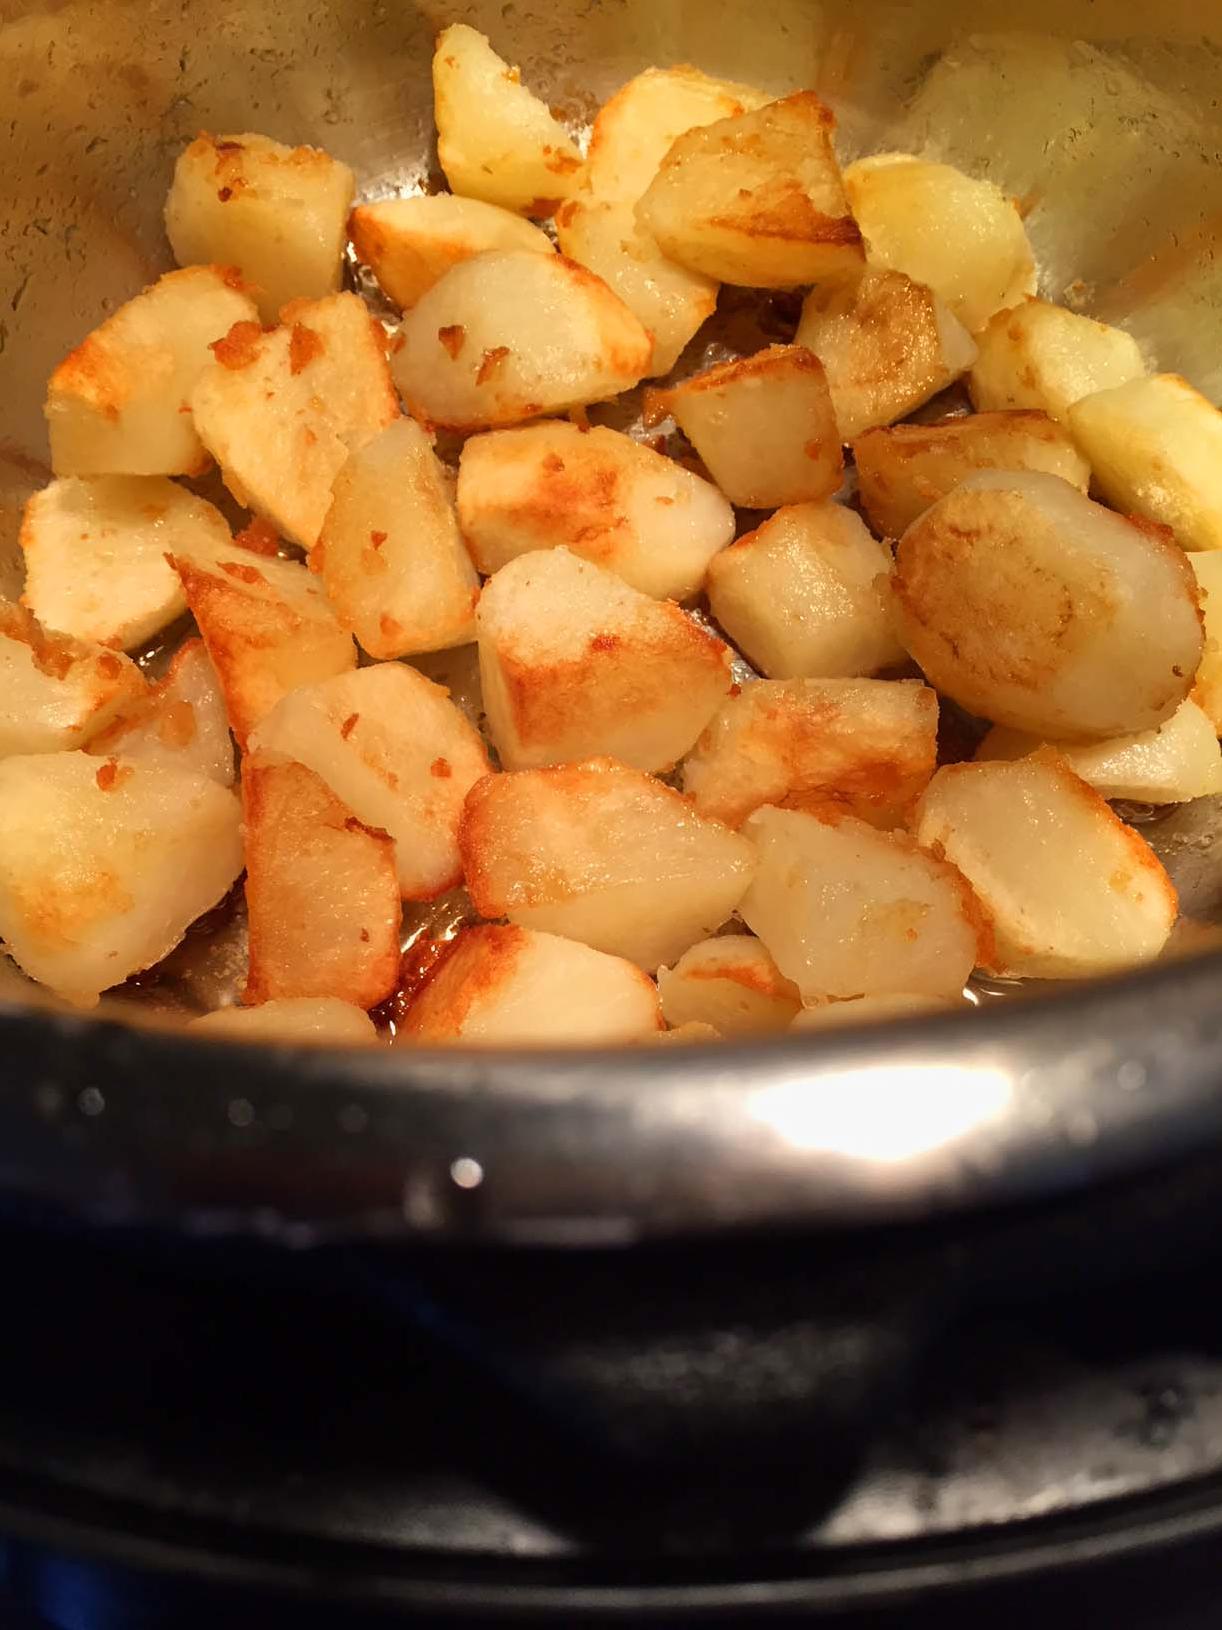  Say goodbye to mushy and bland potatoes and hello to perfectly roasted goodness.